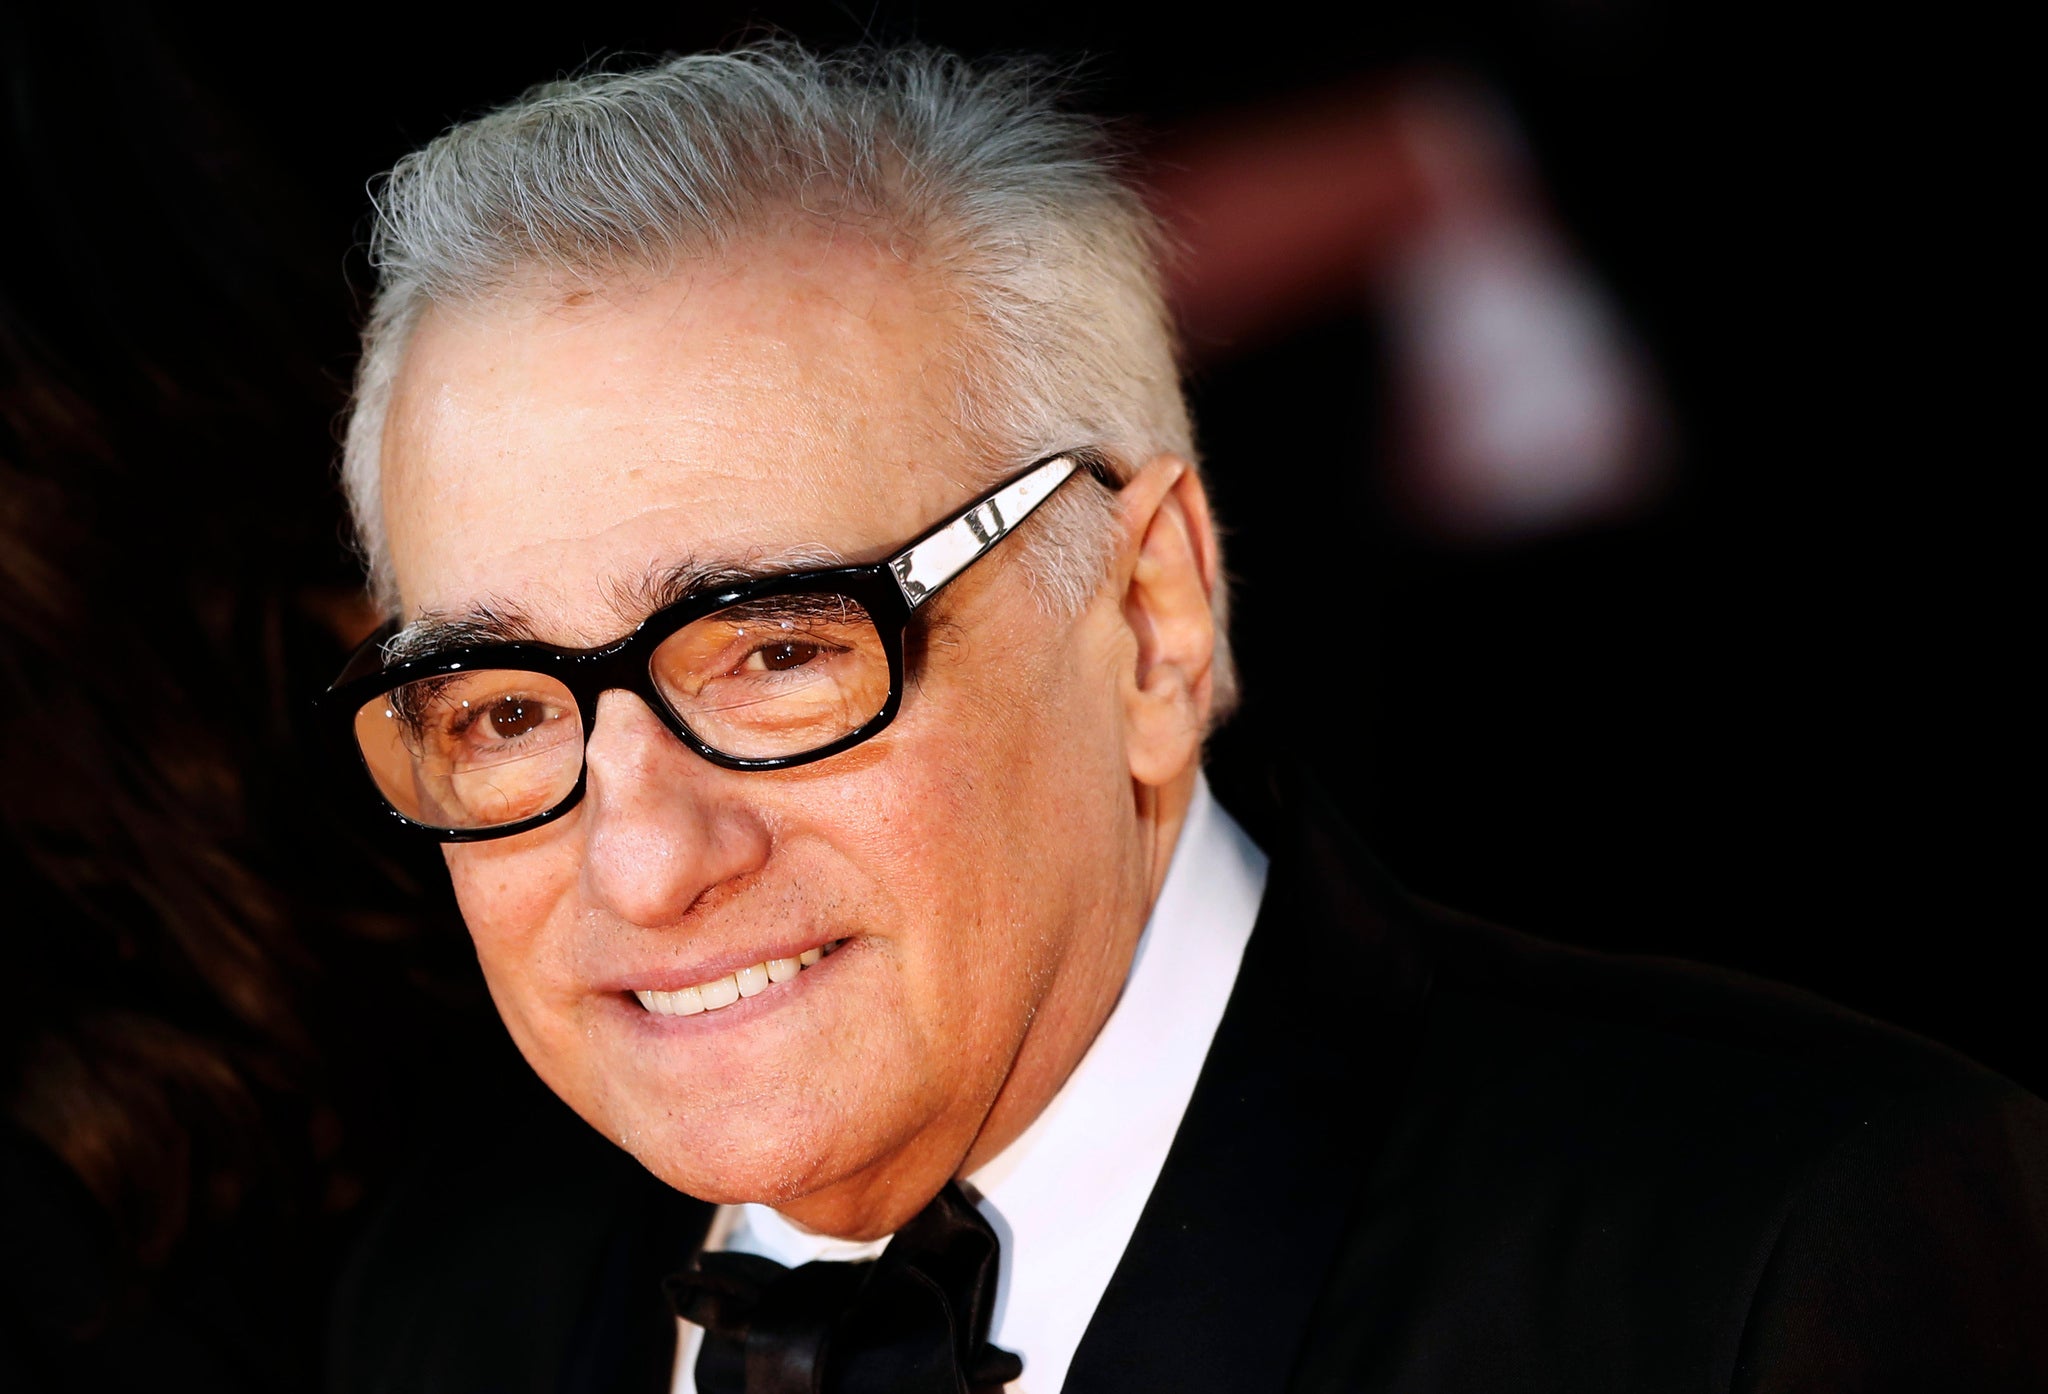 Scorsese's highly anticipated next film, Silence, will get underway later this year